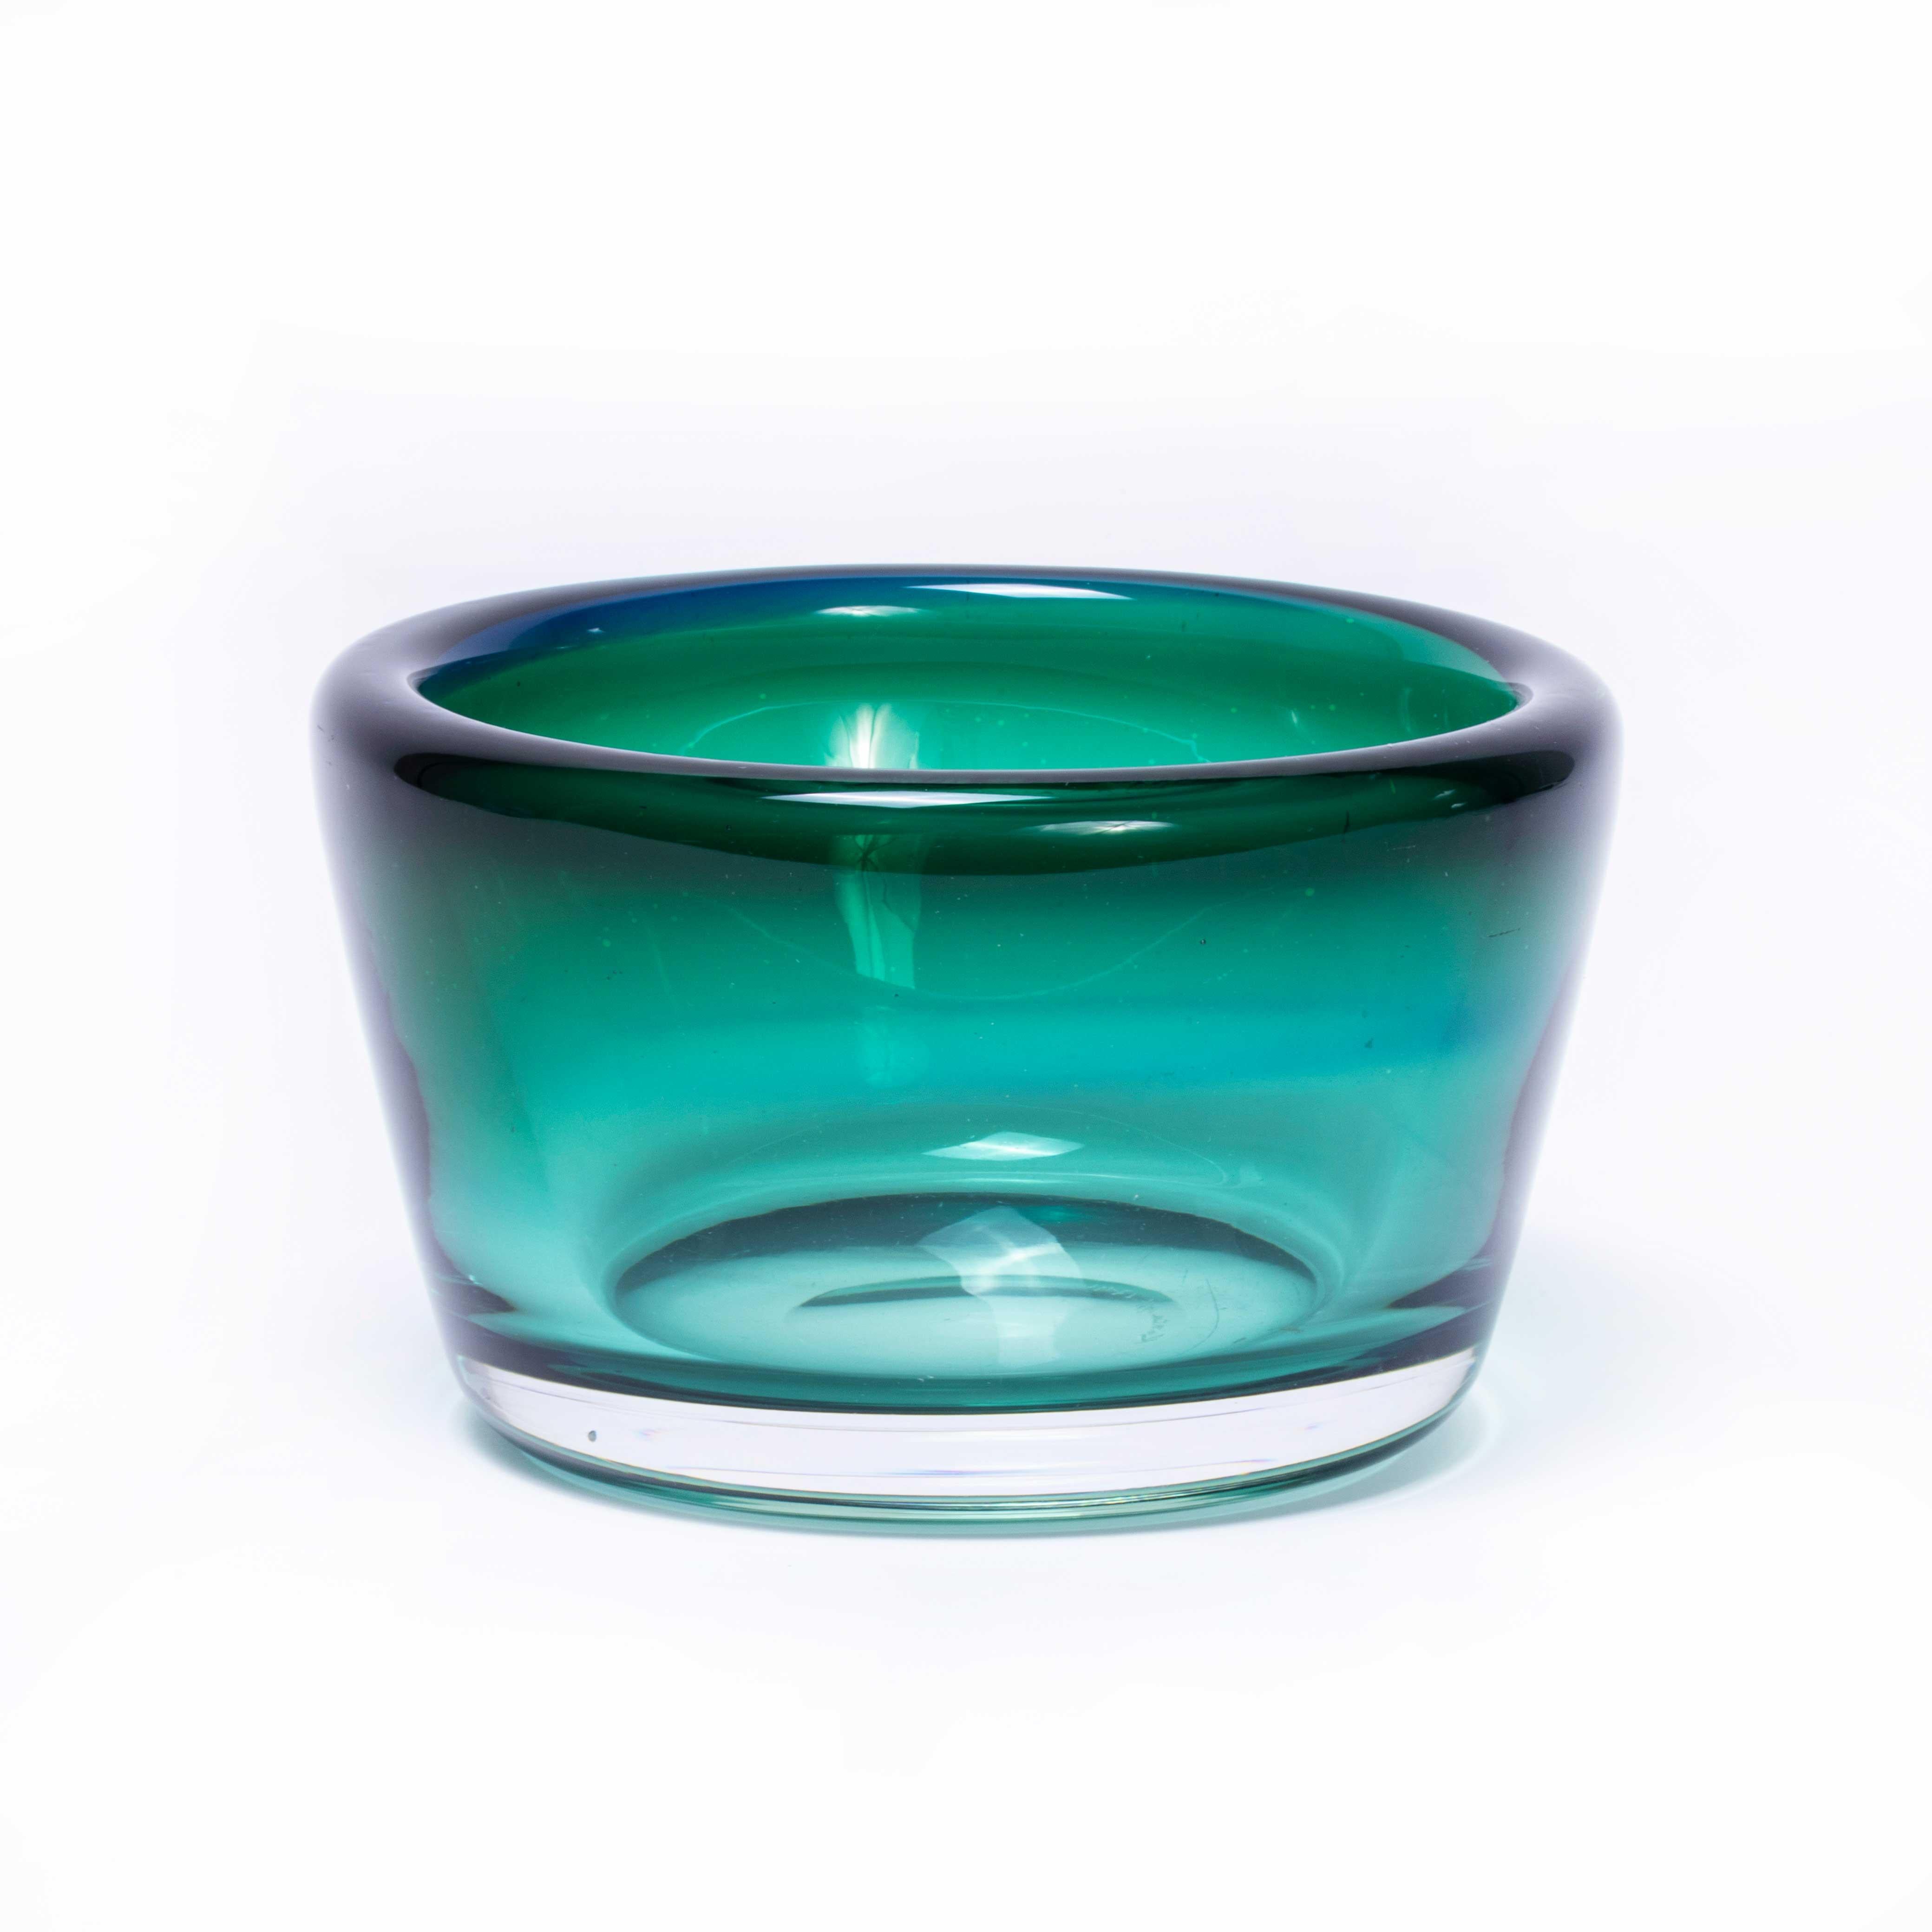 Mid century Kosta Vicke Lindstrand bowl – boda art glass
Mid century Kosta Vicke Lindstrand bowl – boda art glass. Made in Sweden in the Mid Century, stunning vibrant aqua colour with a darker rim around the top. A marvellous creation by the ever